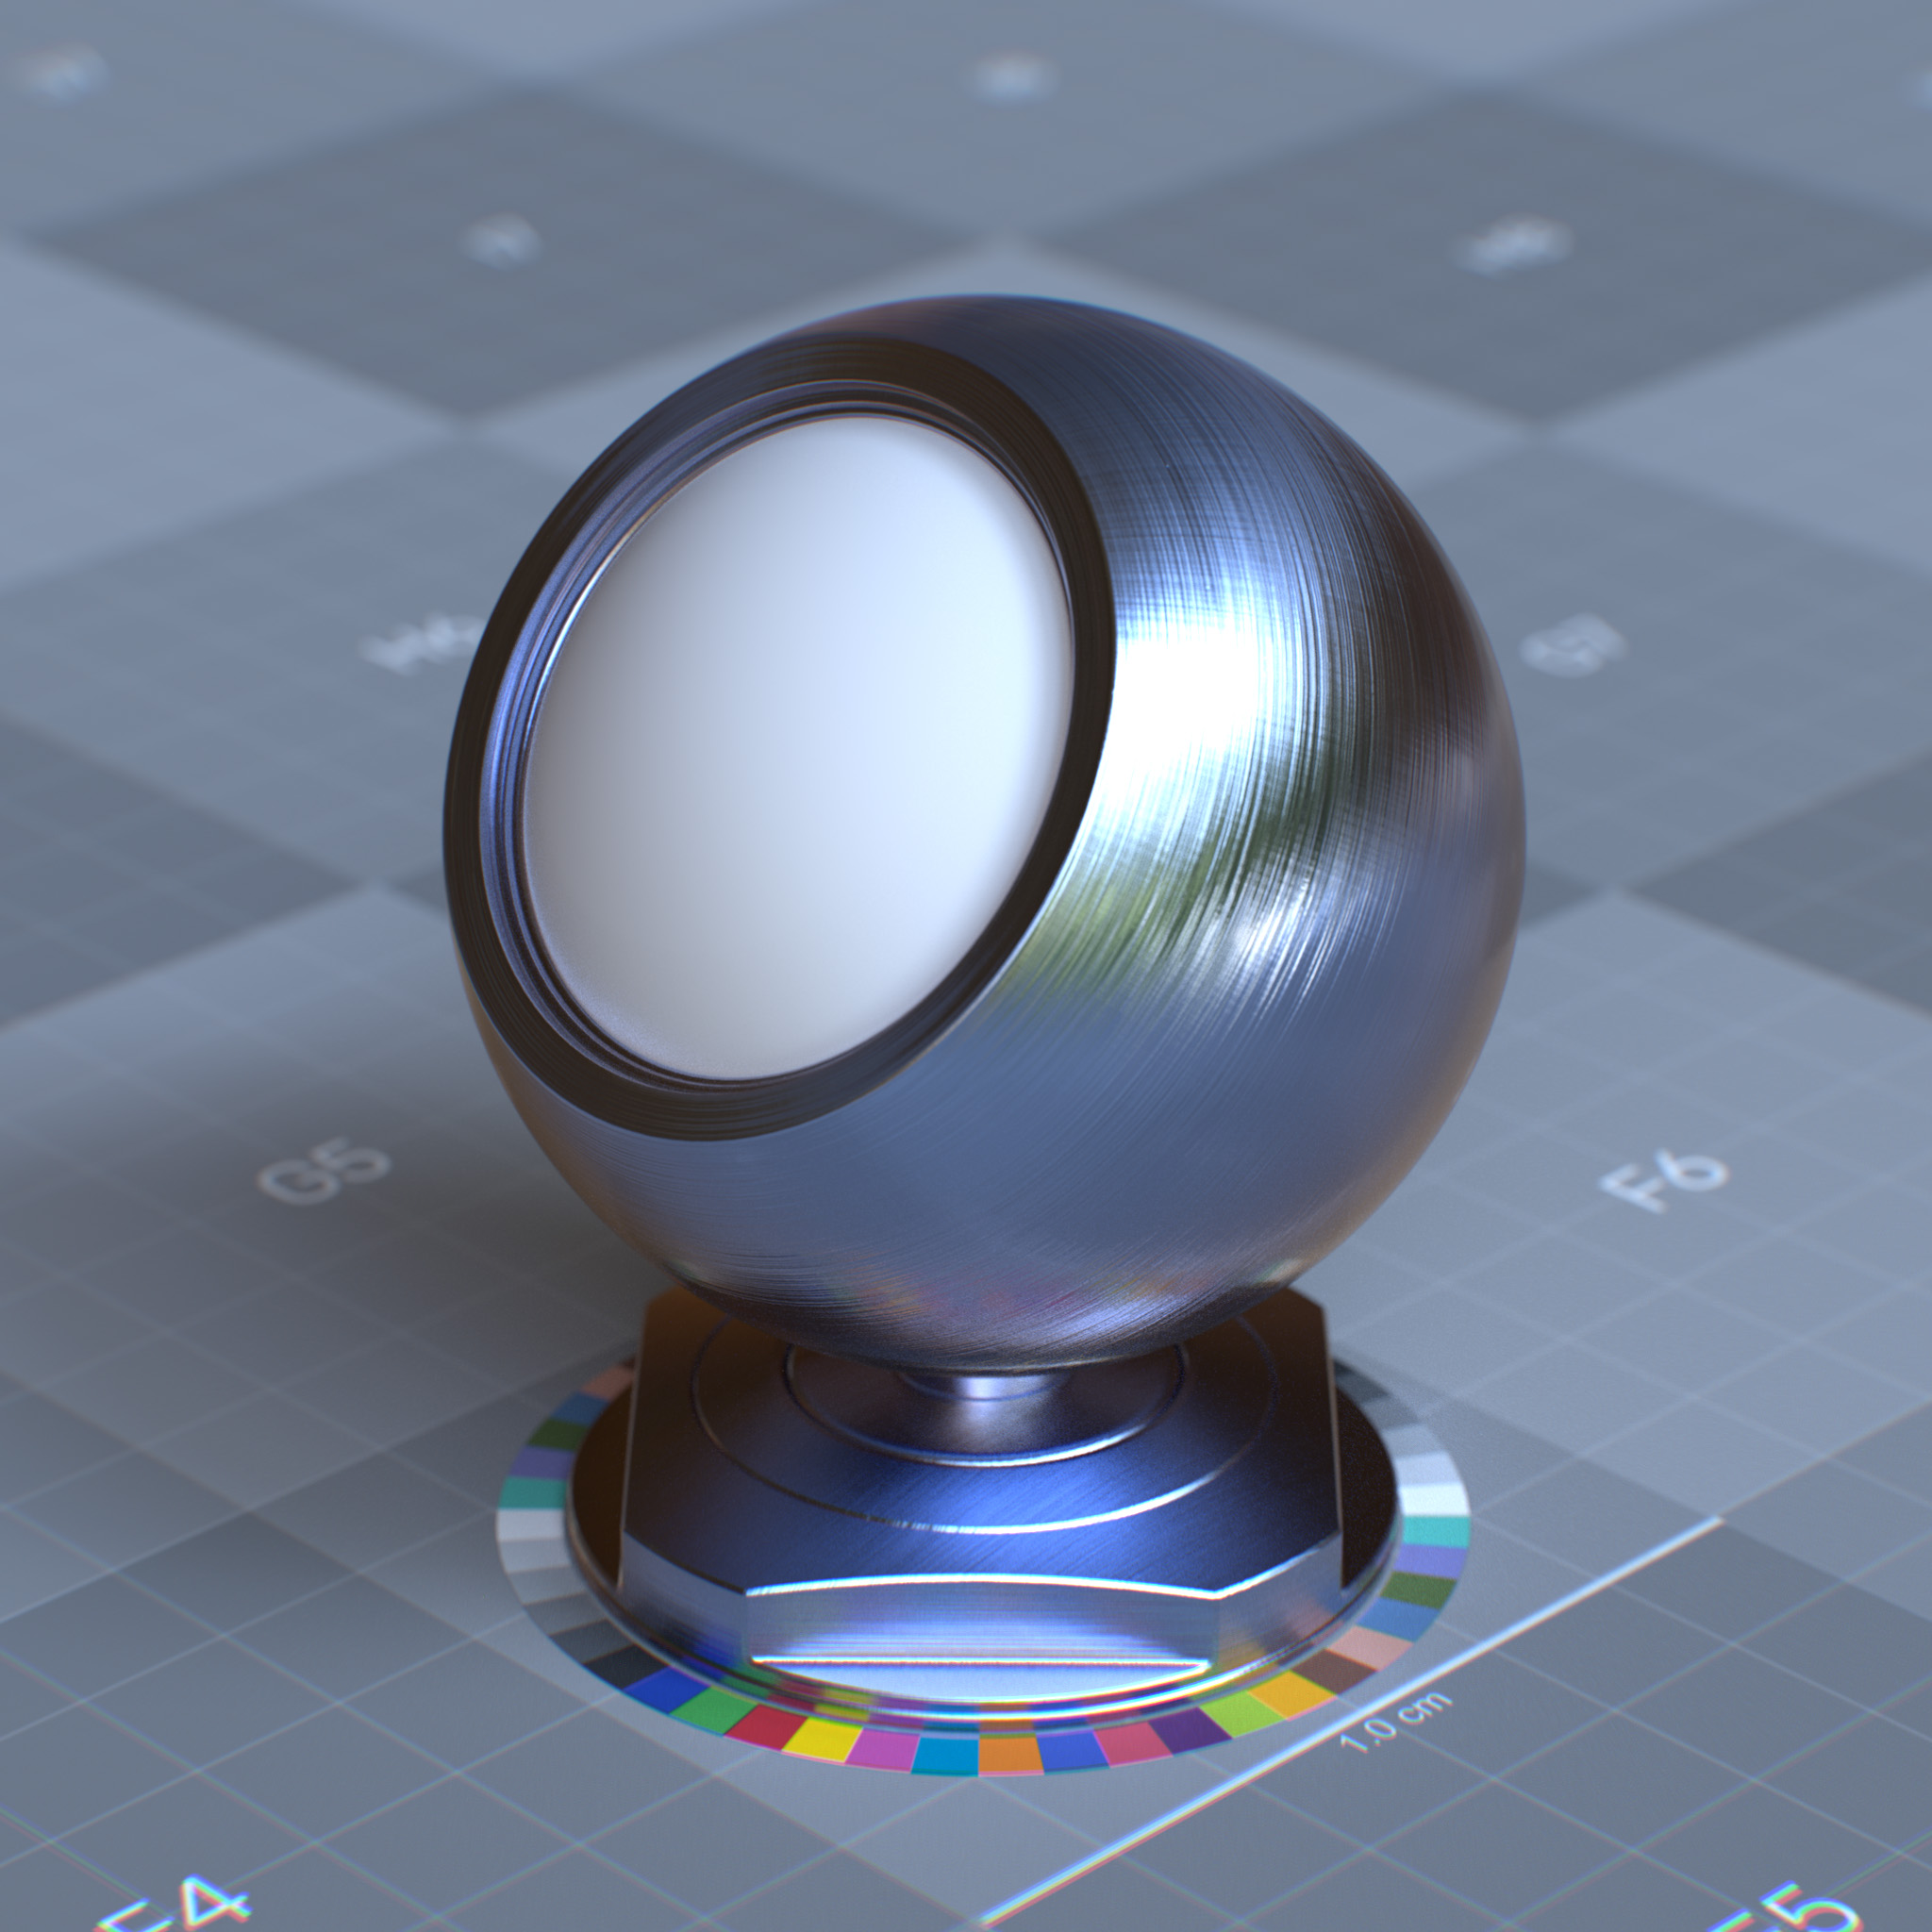 rtx_material_omnisurfacebase_specular_reflection_anisotropy_rotation_0p75